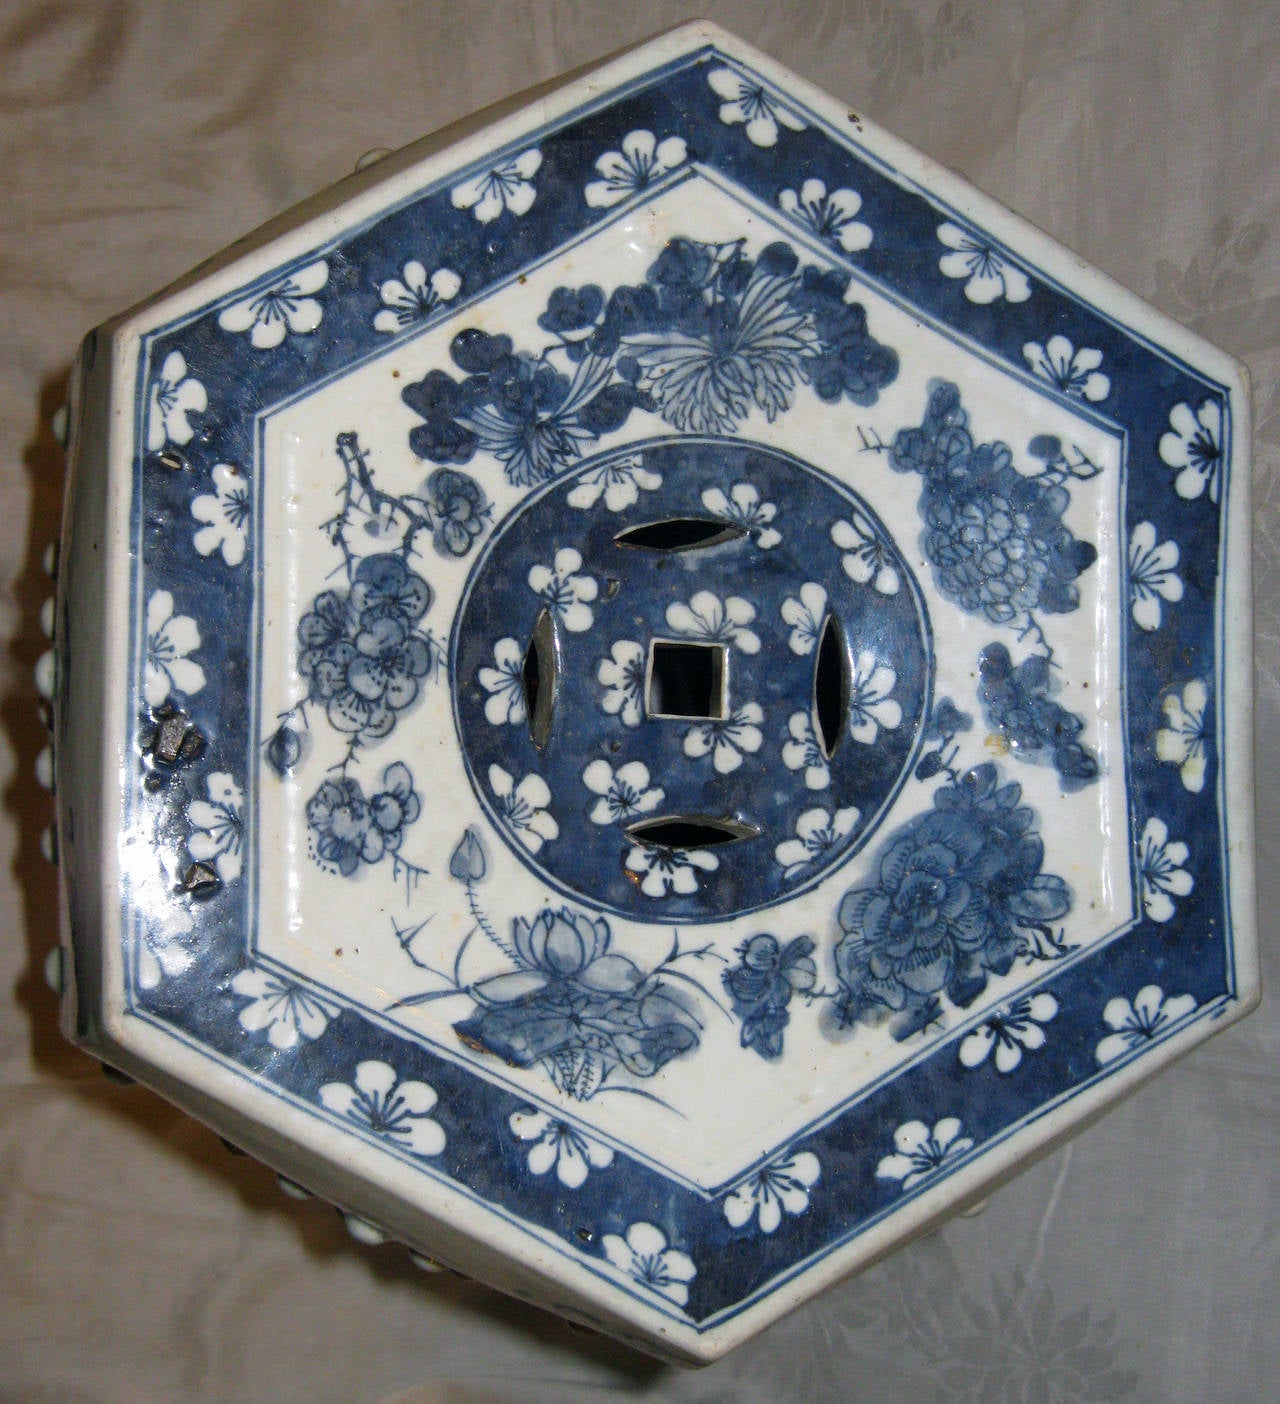 20th Century 20th century Chinese Export Porcelain Garden Seat For Sale